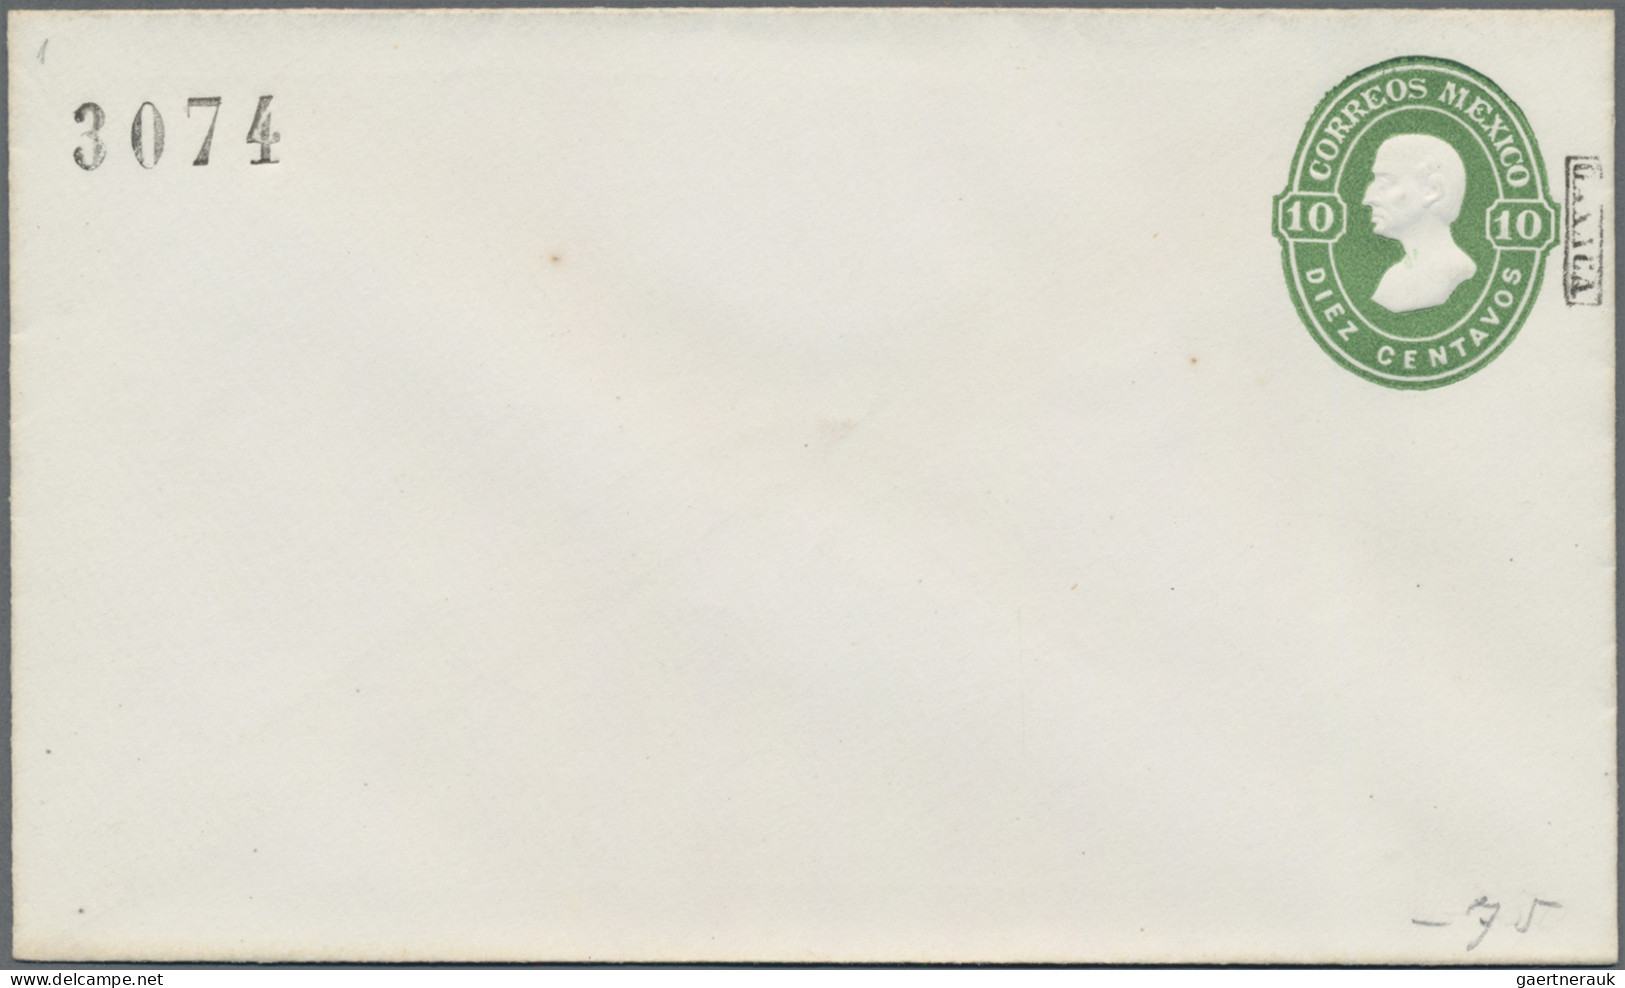 Mexico - Postal Stationary: 1874, Envelope 10 C. Green (5) With District Ovpt. 3 - Mexico